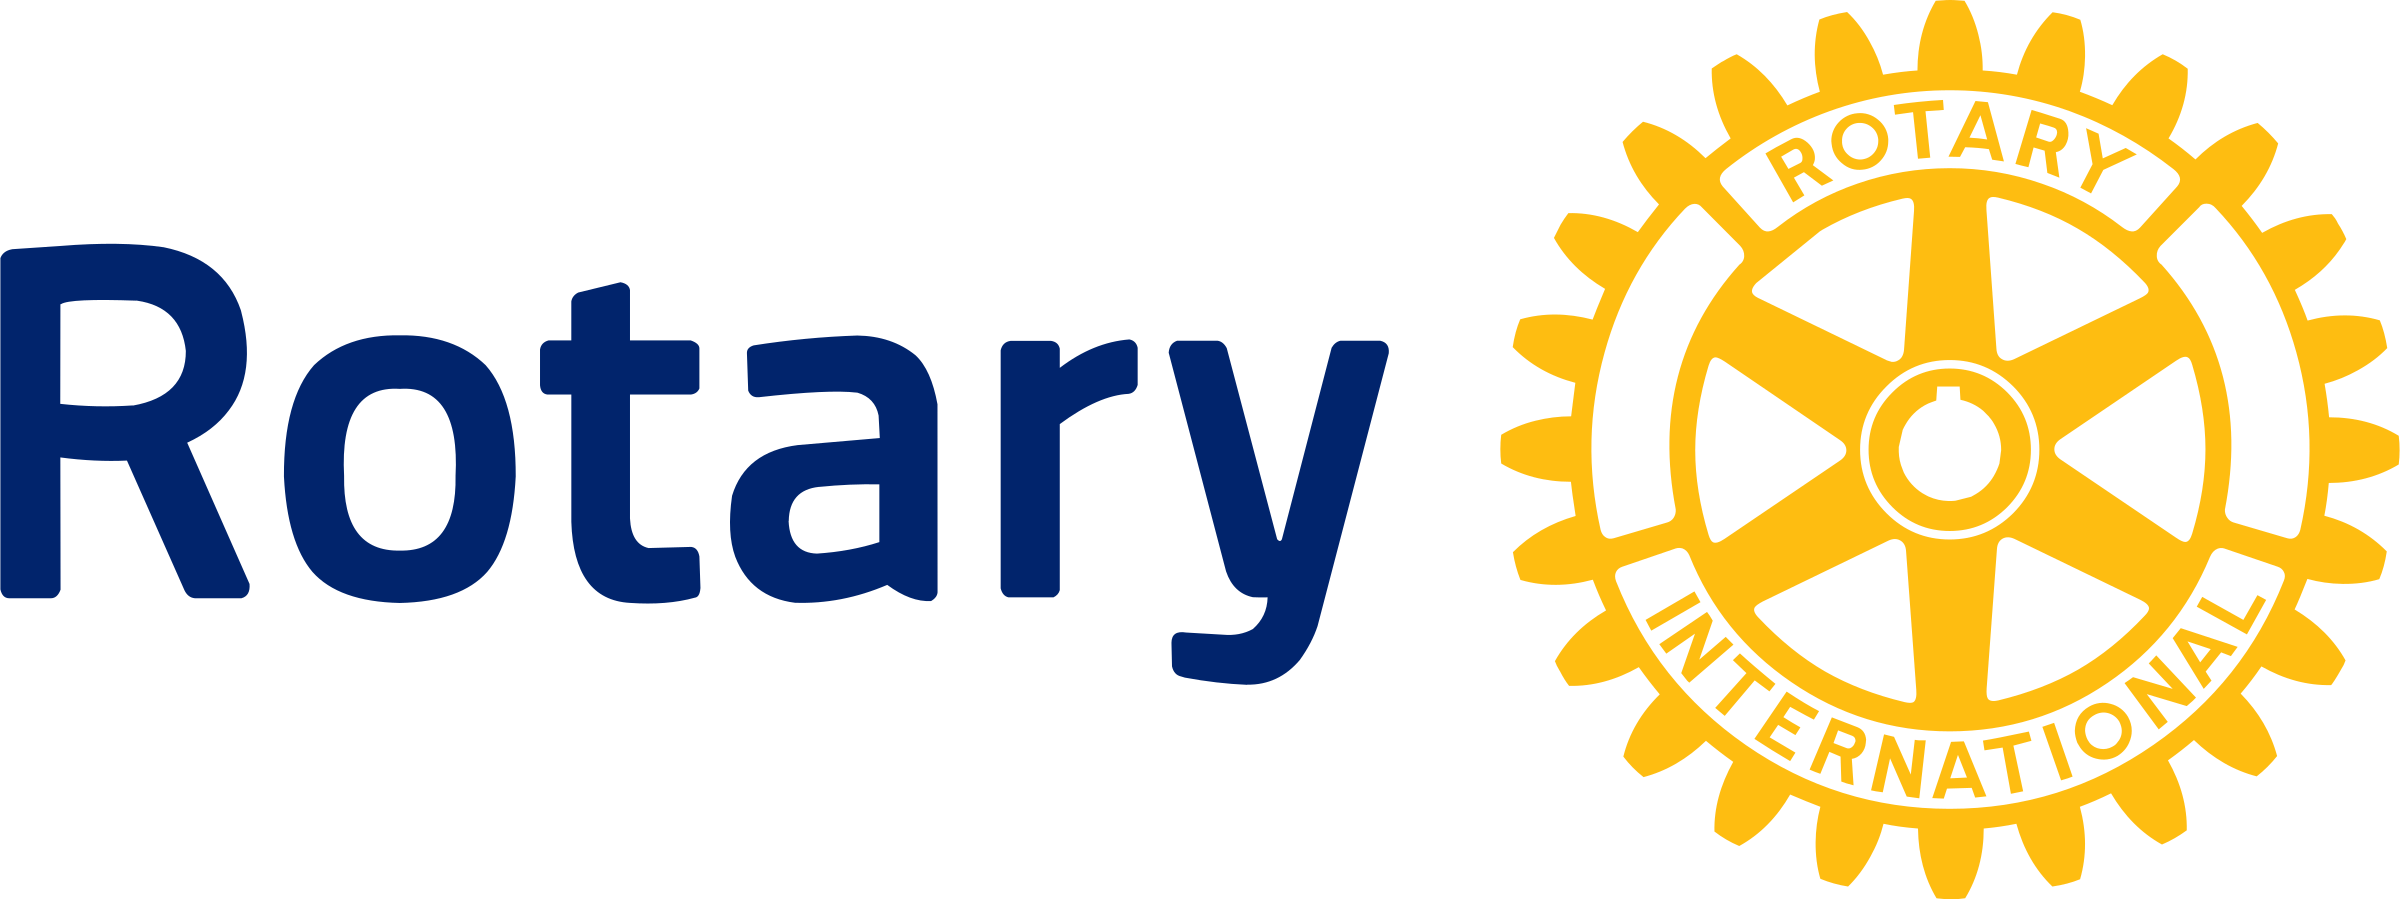 rotary-logo-png-transparent.png